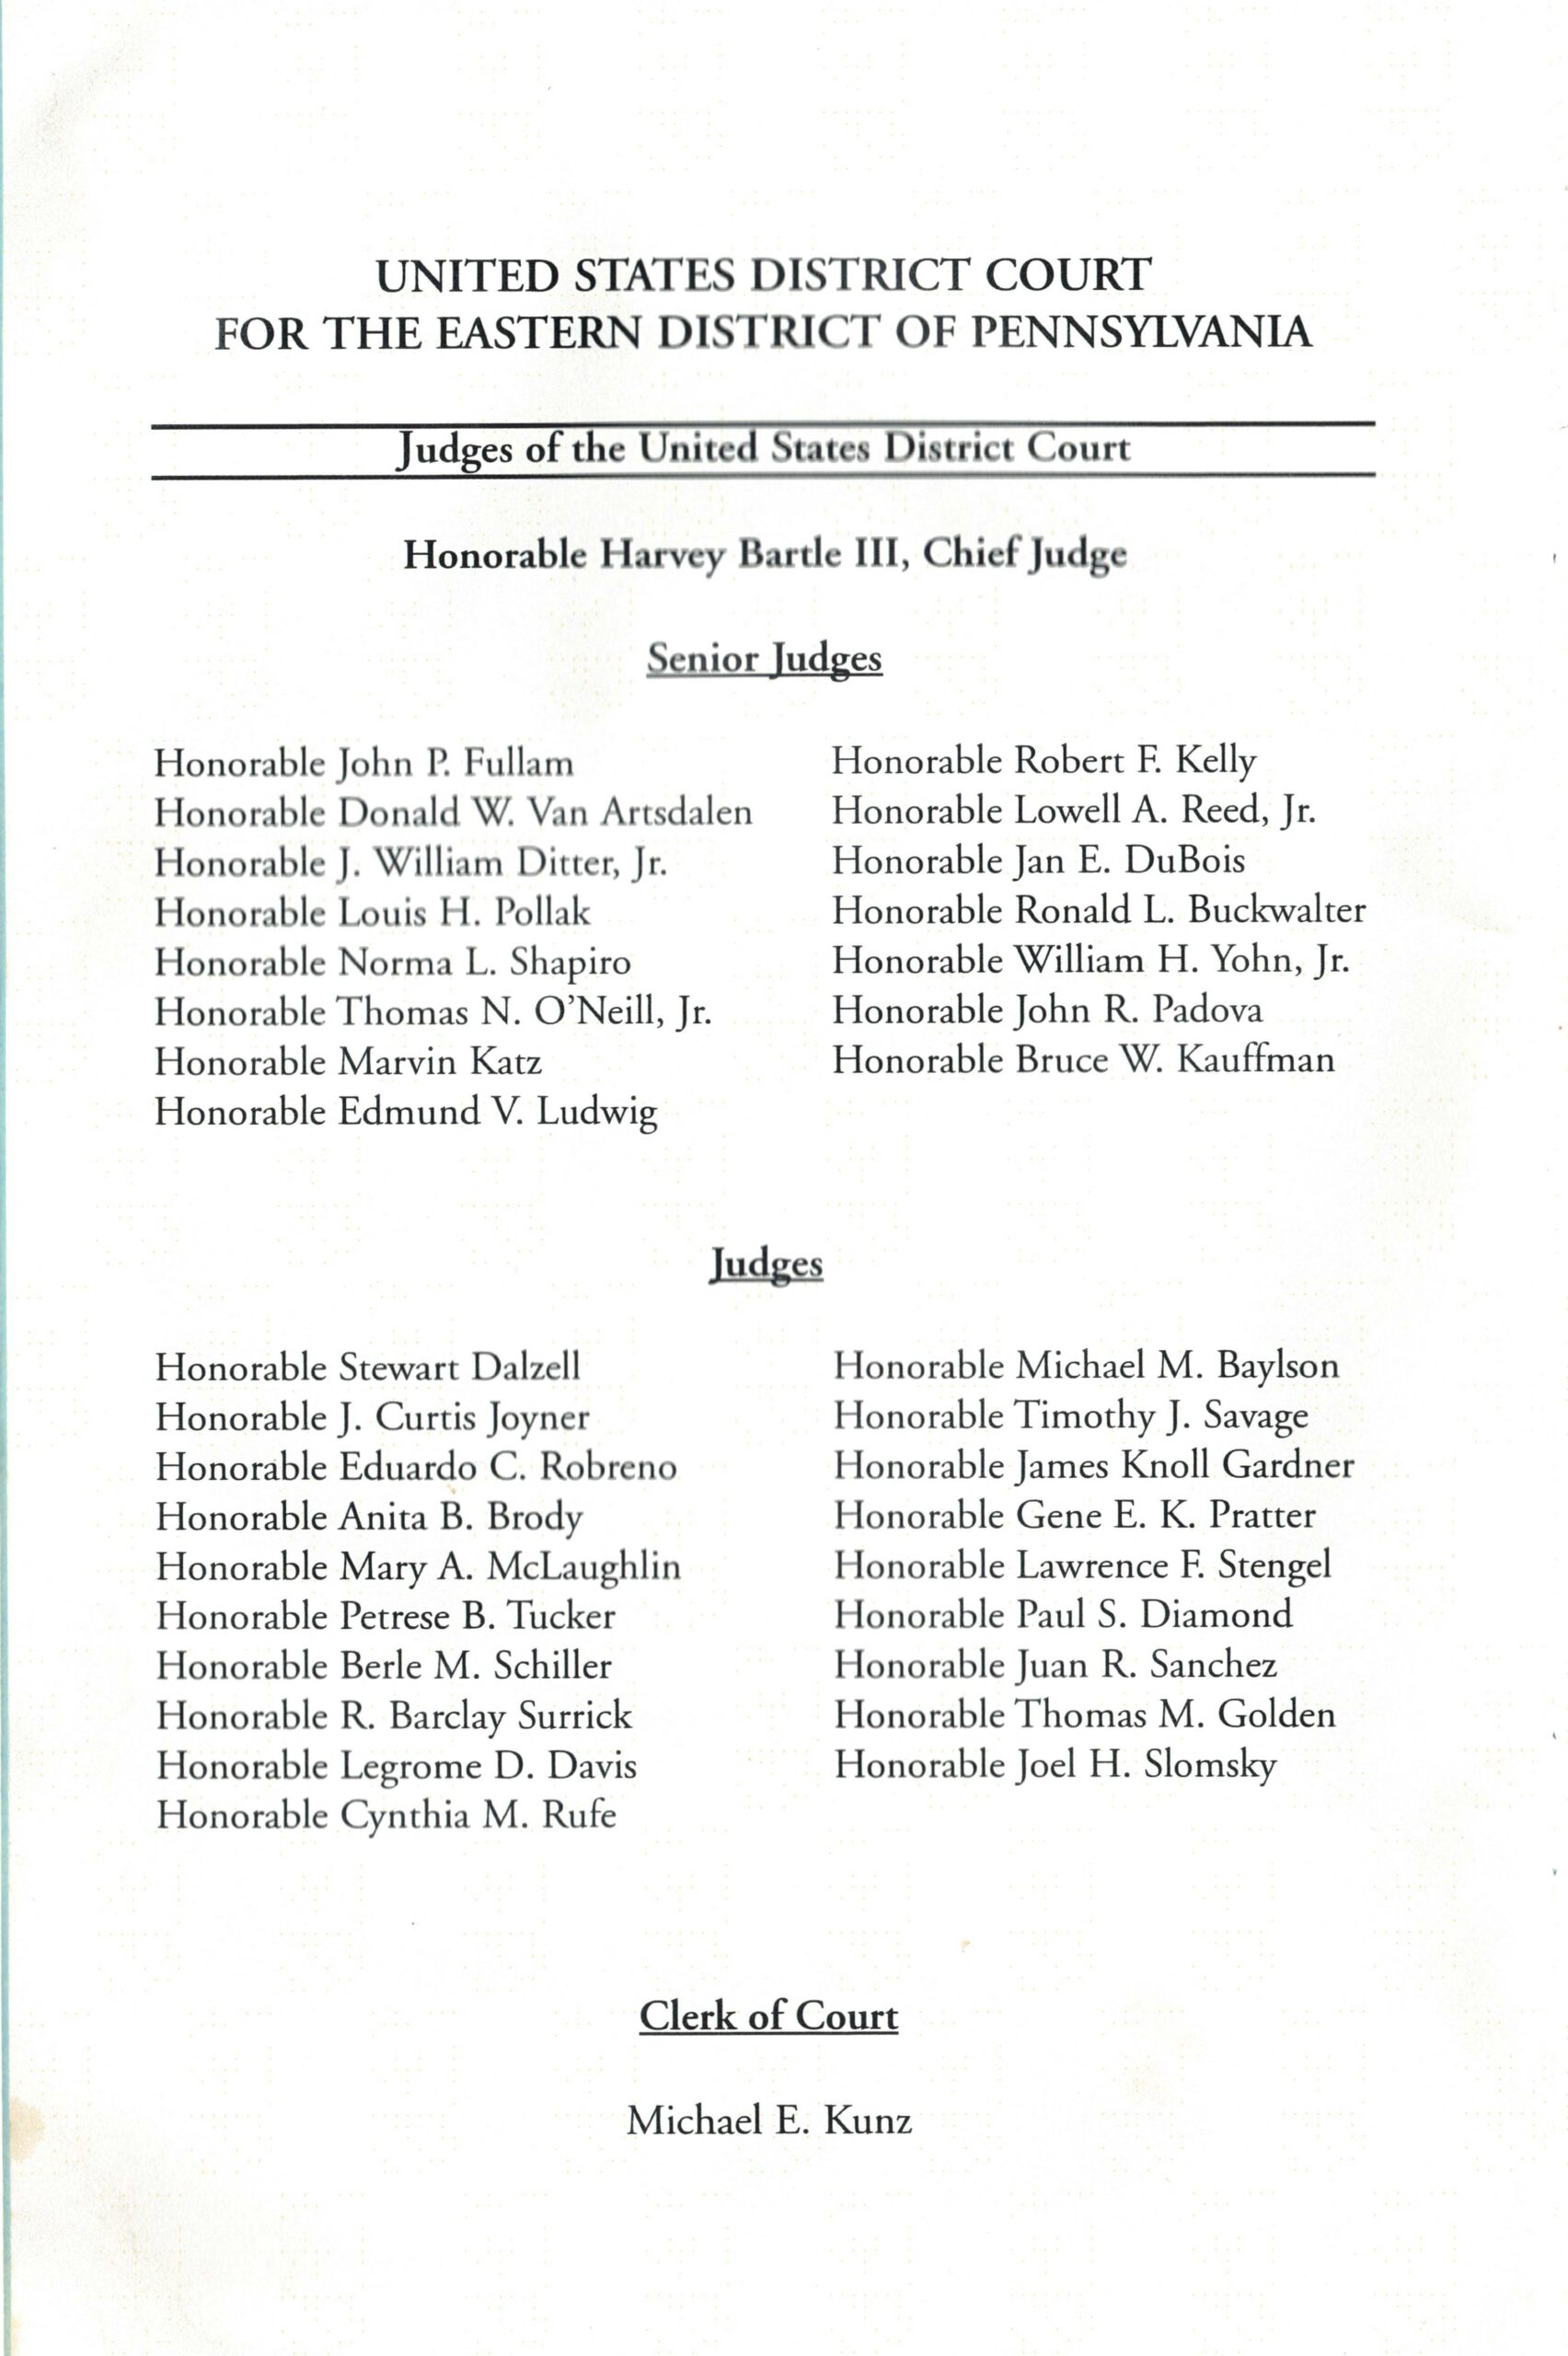 Fourth page of the Jones program pamphlet with list of judges.